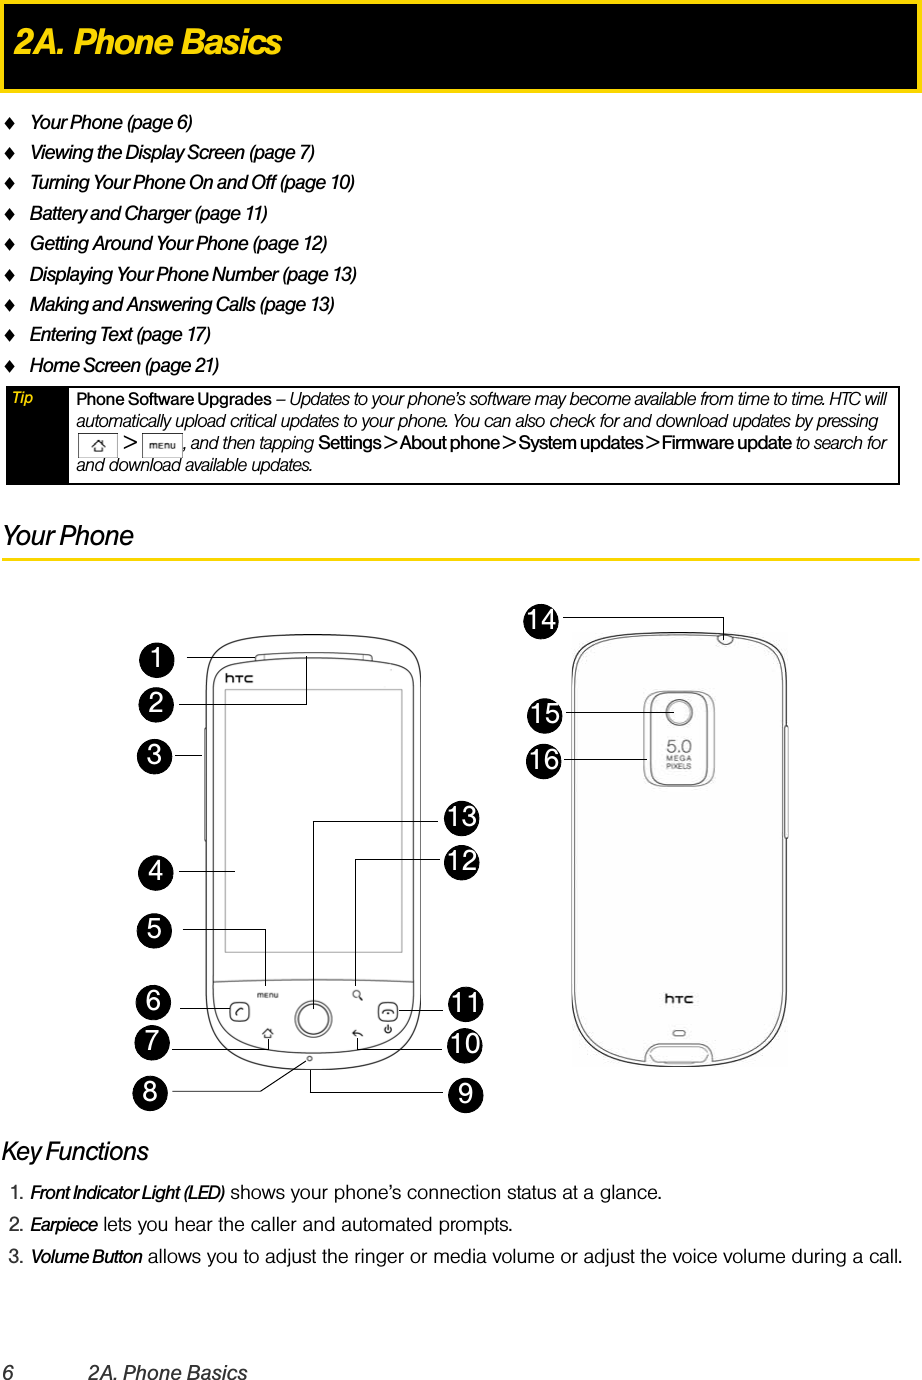 6 2A. Phone BasicsࡗYour Phone (page 6)ࡗViewing the Display Screen (page 7)ࡗTurning Your Phone On and Off (page 10)ࡗBattery and Charger (page 11)ࡗGetting Around Your Phone (page 12)ࡗDisplaying Your Phone Number (page 13)ࡗMaking and Answering Calls (page 13)ࡗEntering Text (page 17)ࡗHome Screen (page 21)Your PhoneKey Functions1. Front Indicator Light (LED) shows your phone’s connection status at a glance.2. Earpiece lets you hear the caller and automated prompts.3. Volume Button allows you to adjust the ringer or media volume or adjust the voice volume during a call.2A. Phone BasicsTip Phone Software Upgrades – Updates to your phone’s software may become available from time to time. HTC will automatically upload critical updates to your phone. You can also check for and download updates by pressing  &gt;  , and then tapping Settings &gt; About phone &gt; System updates &gt; Firmware update to search for and download available updates. 16427113510121413891615